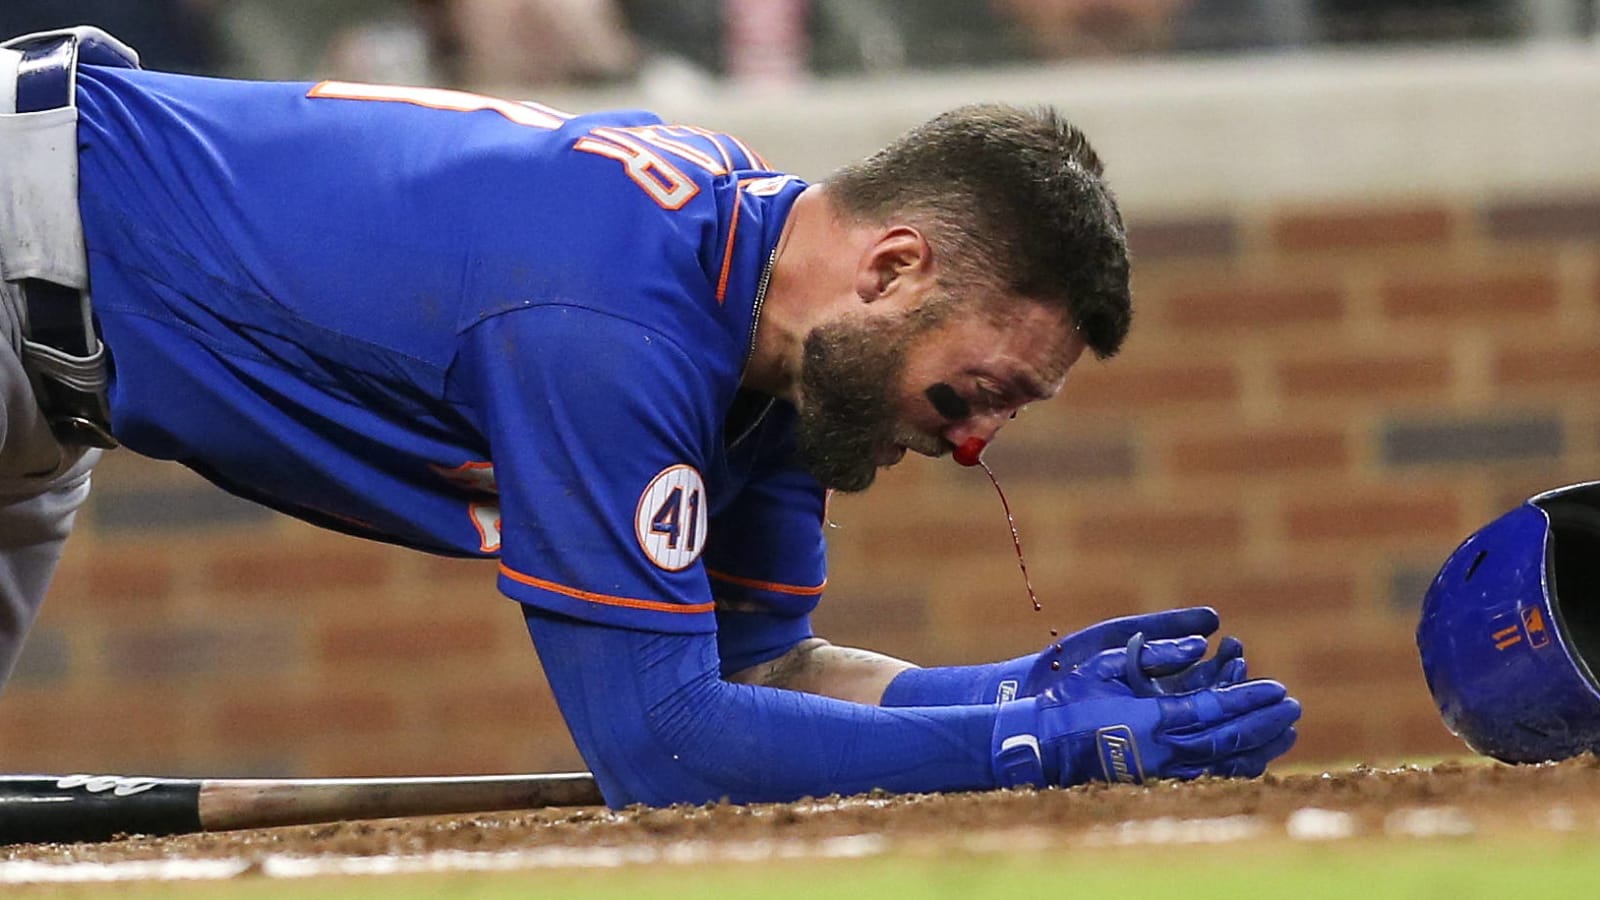 Mets OF Kevin Pillar takes 94mph fastball to face